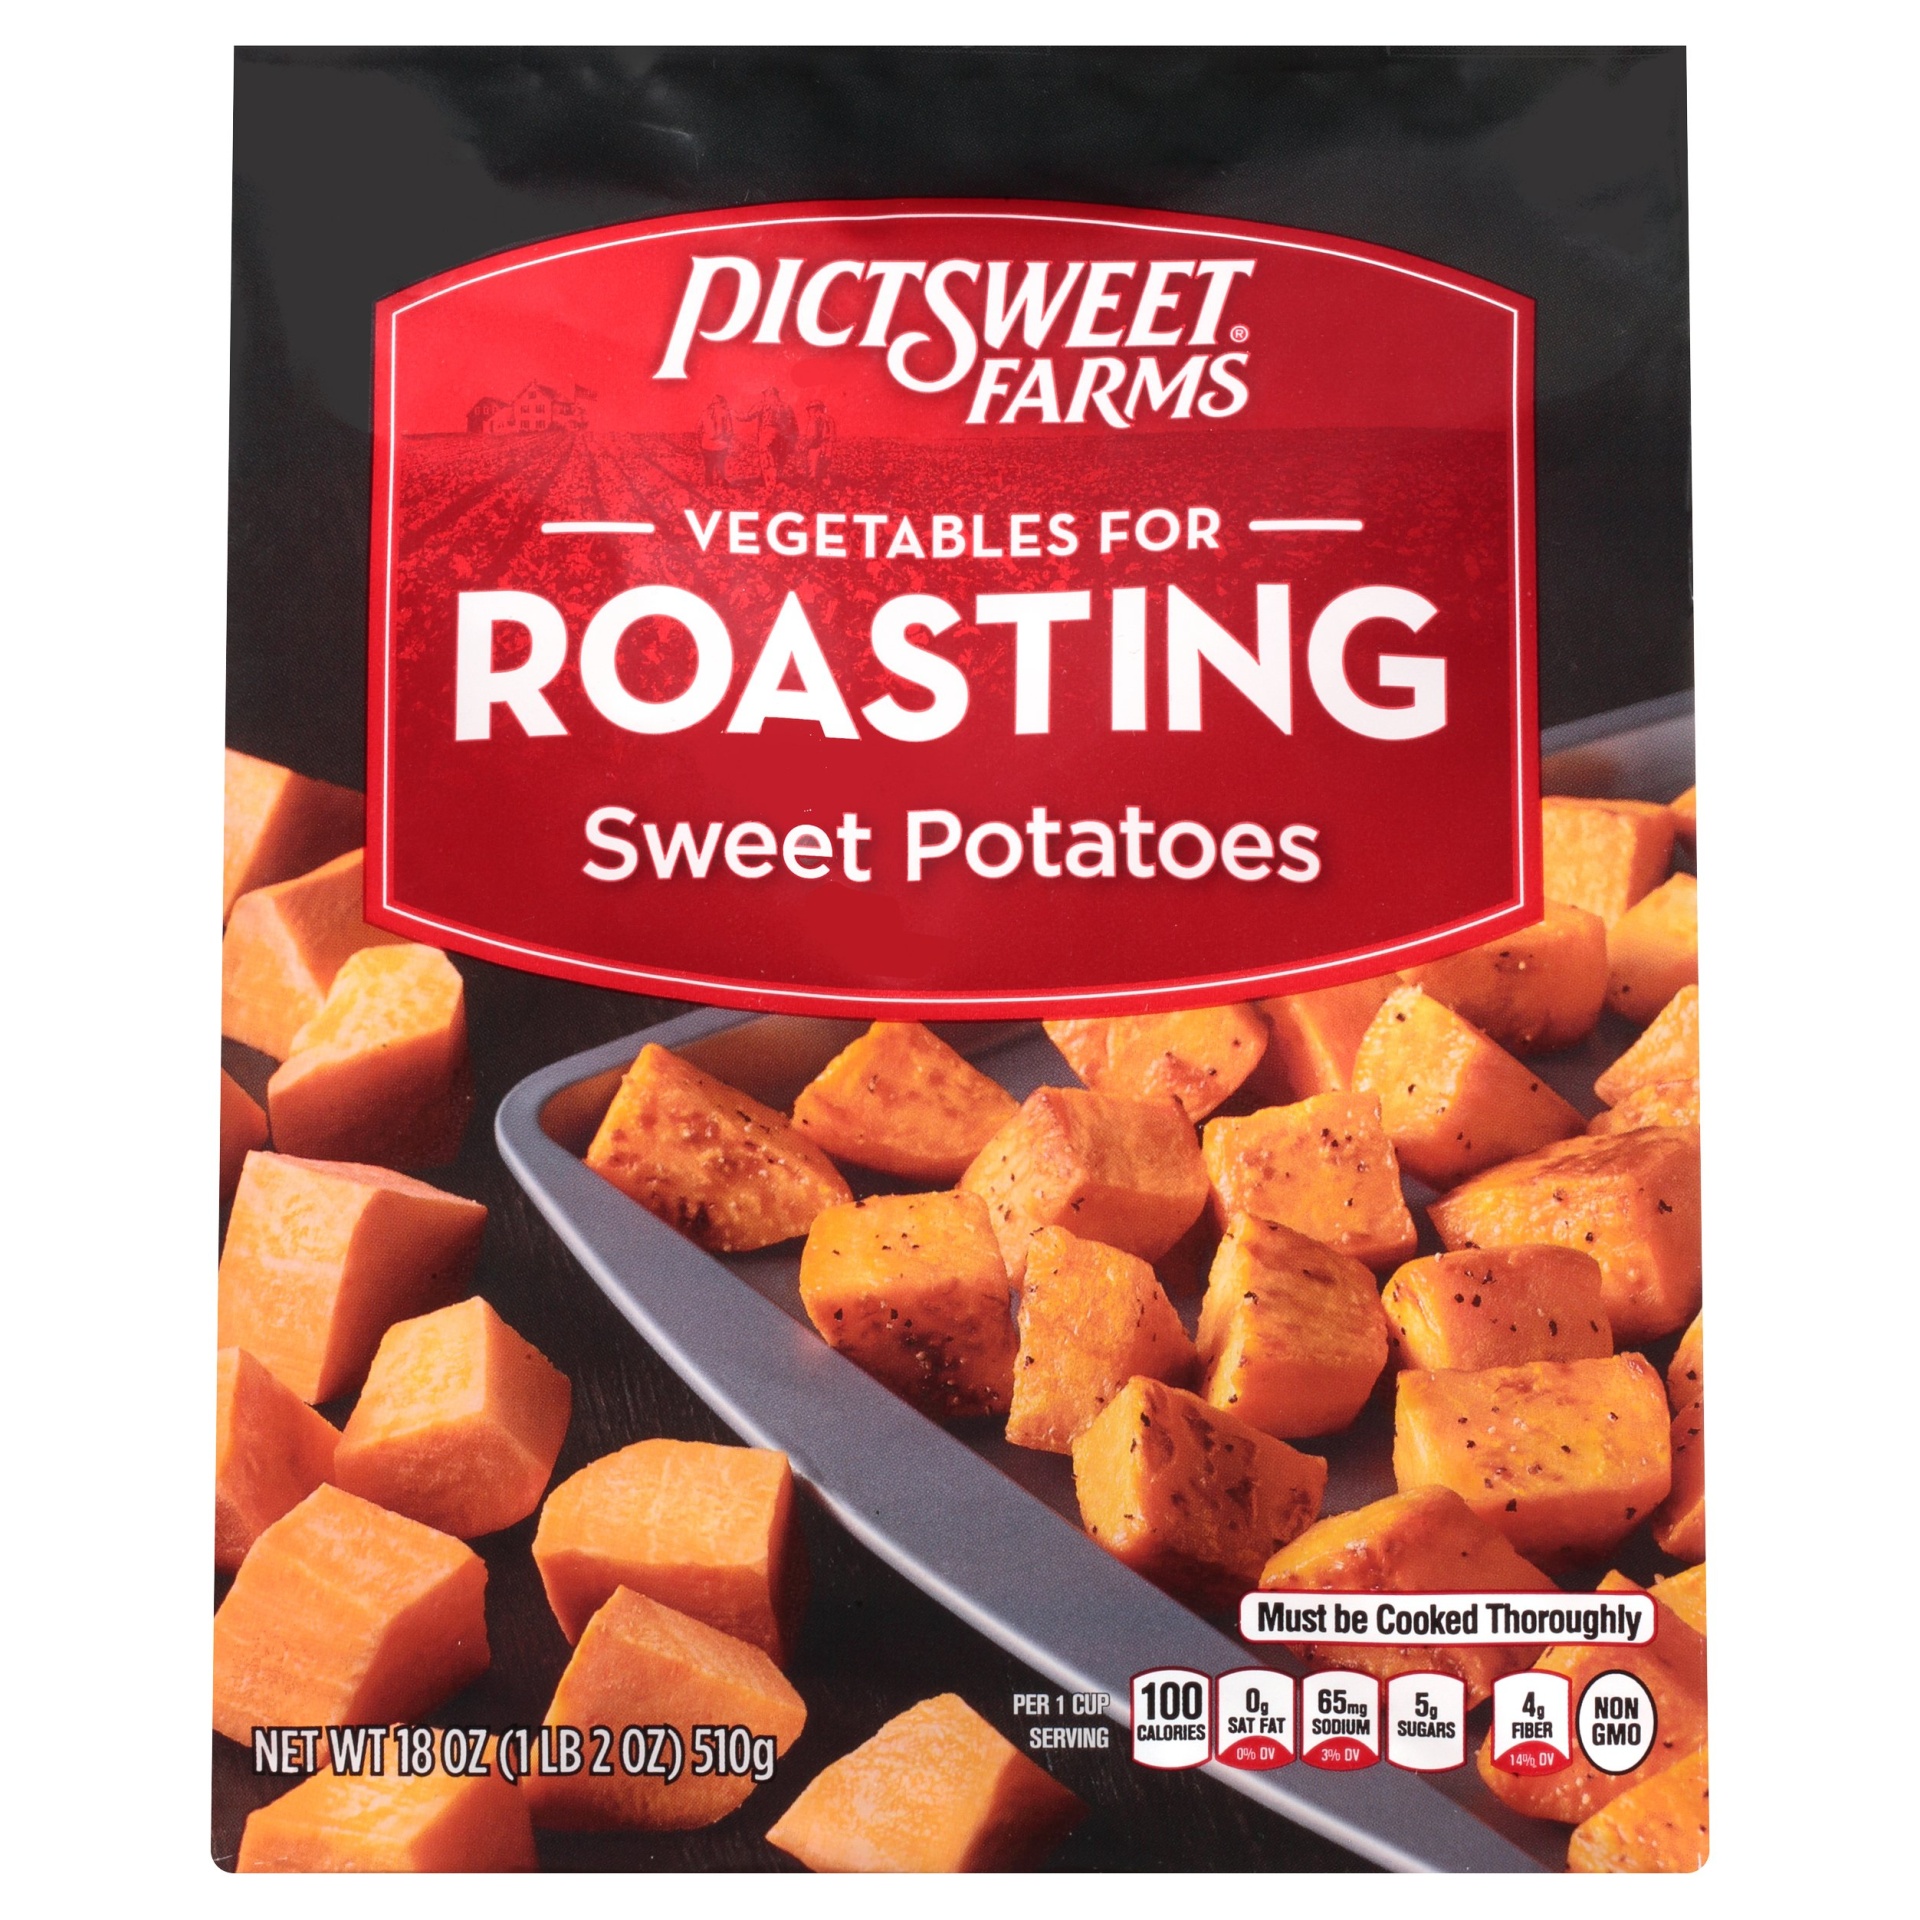 slide 1 of 8, PictSweet Farms Vegetables For Roasting Sweet Potatoes, 18 oz